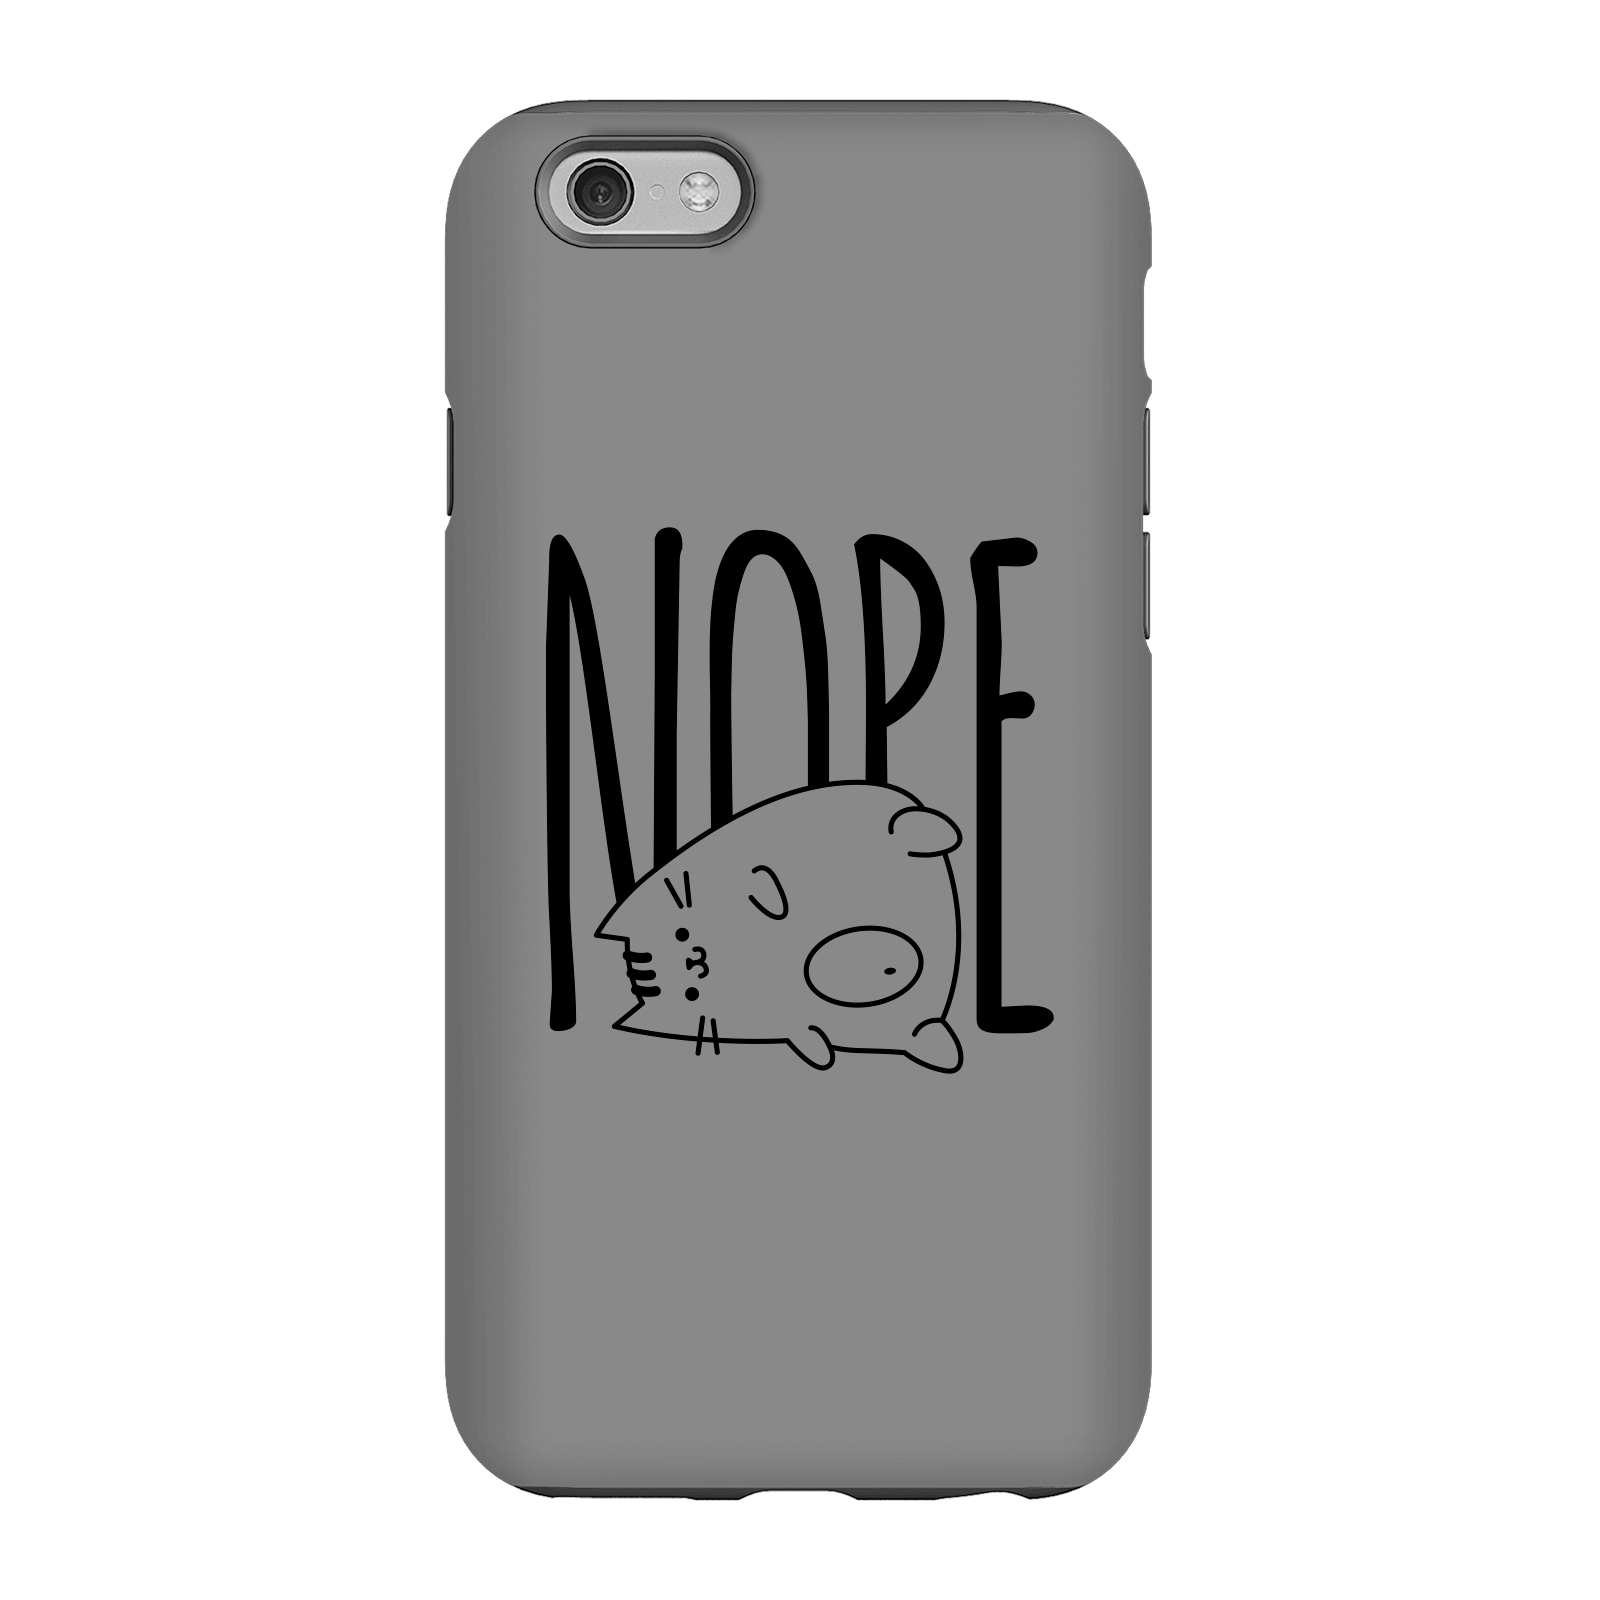 Nope Phone Case for iPhone and Android - iPhone 6S - Tough Case - Matte